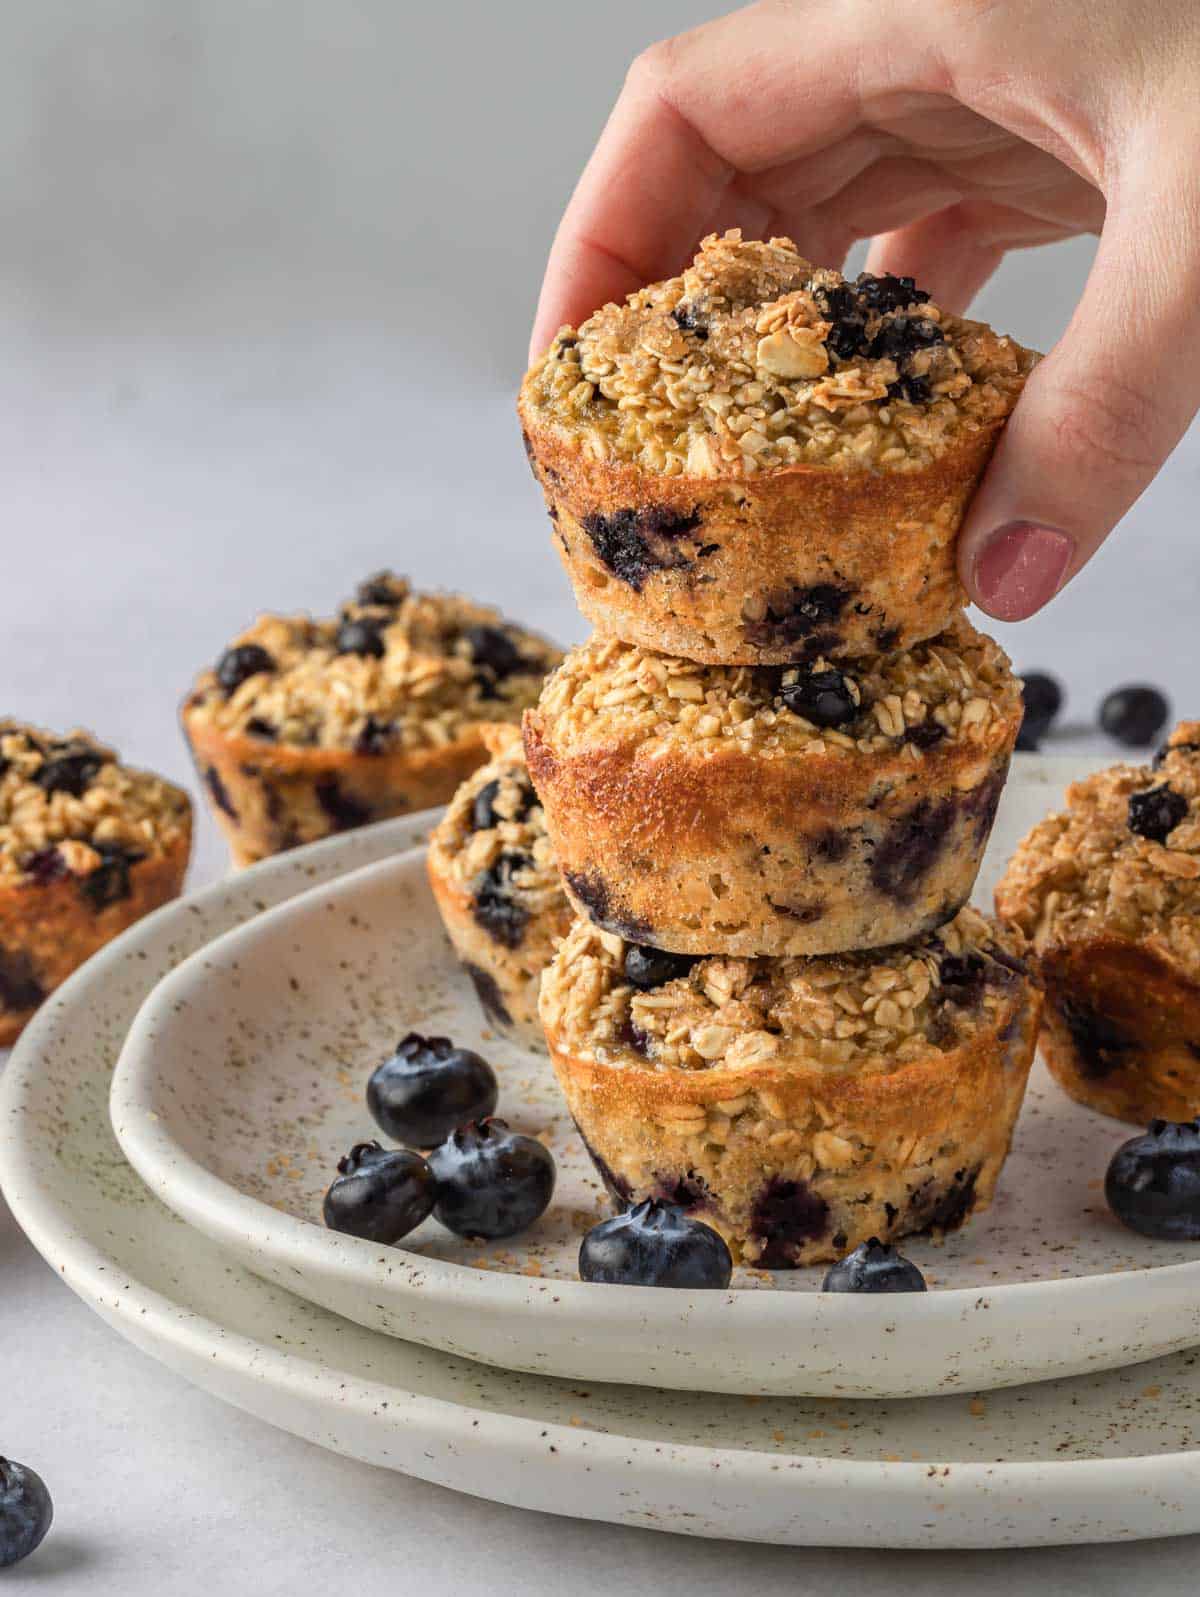 A hand places a blueberry cup on a stack.